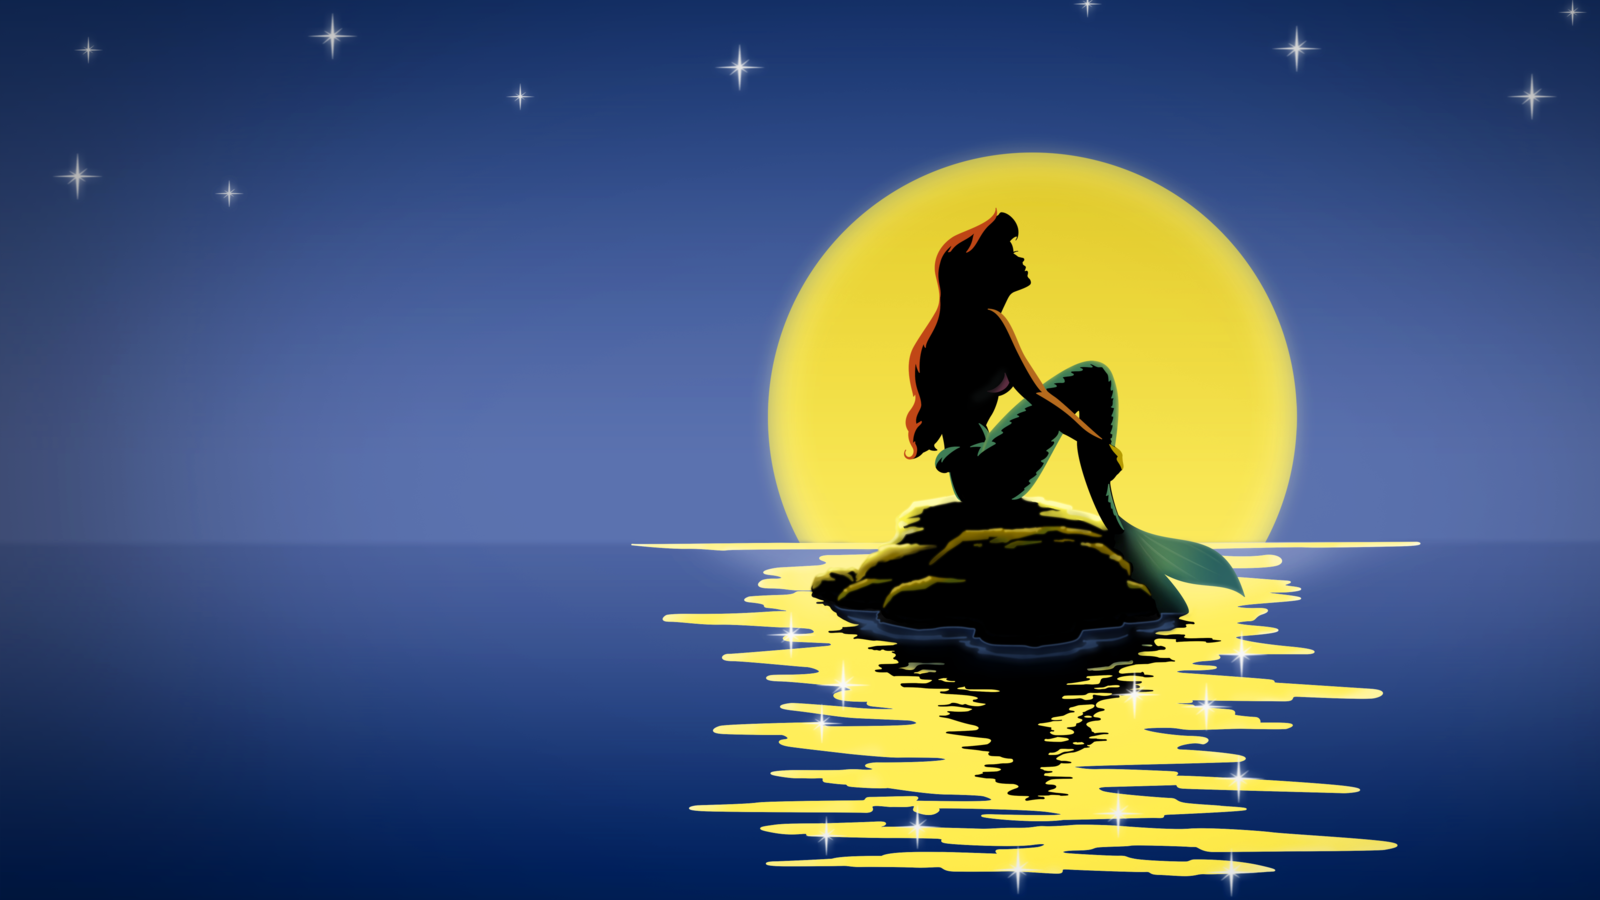 Nice Images Collection: The Little Mermaid Desktop Wallpapers